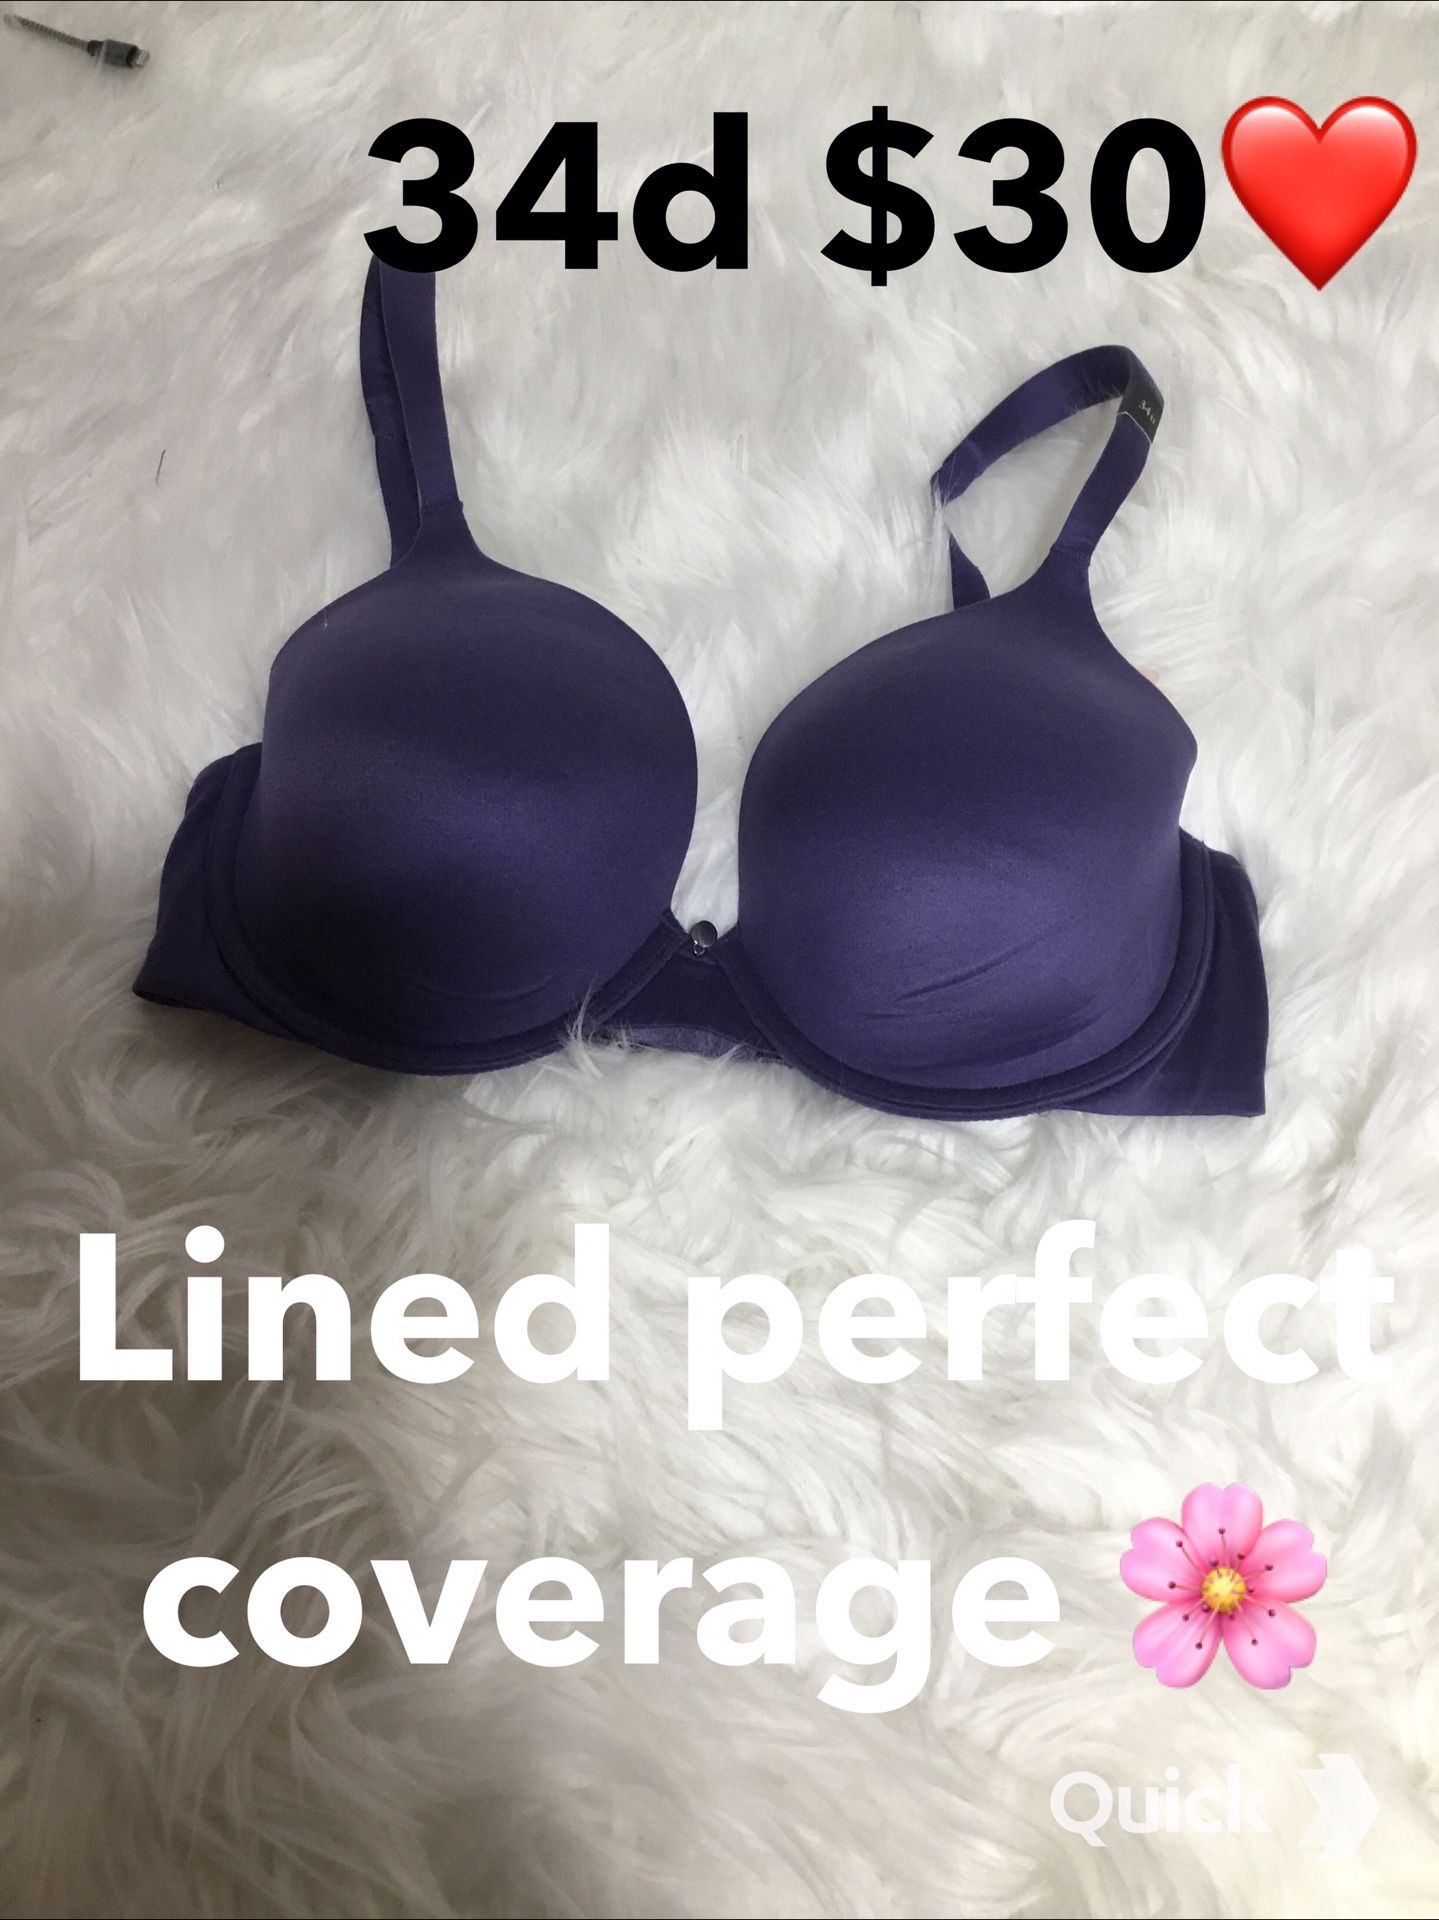 New Bra Victoria Secret Size 34d Lined Perfect Coverage firm Price